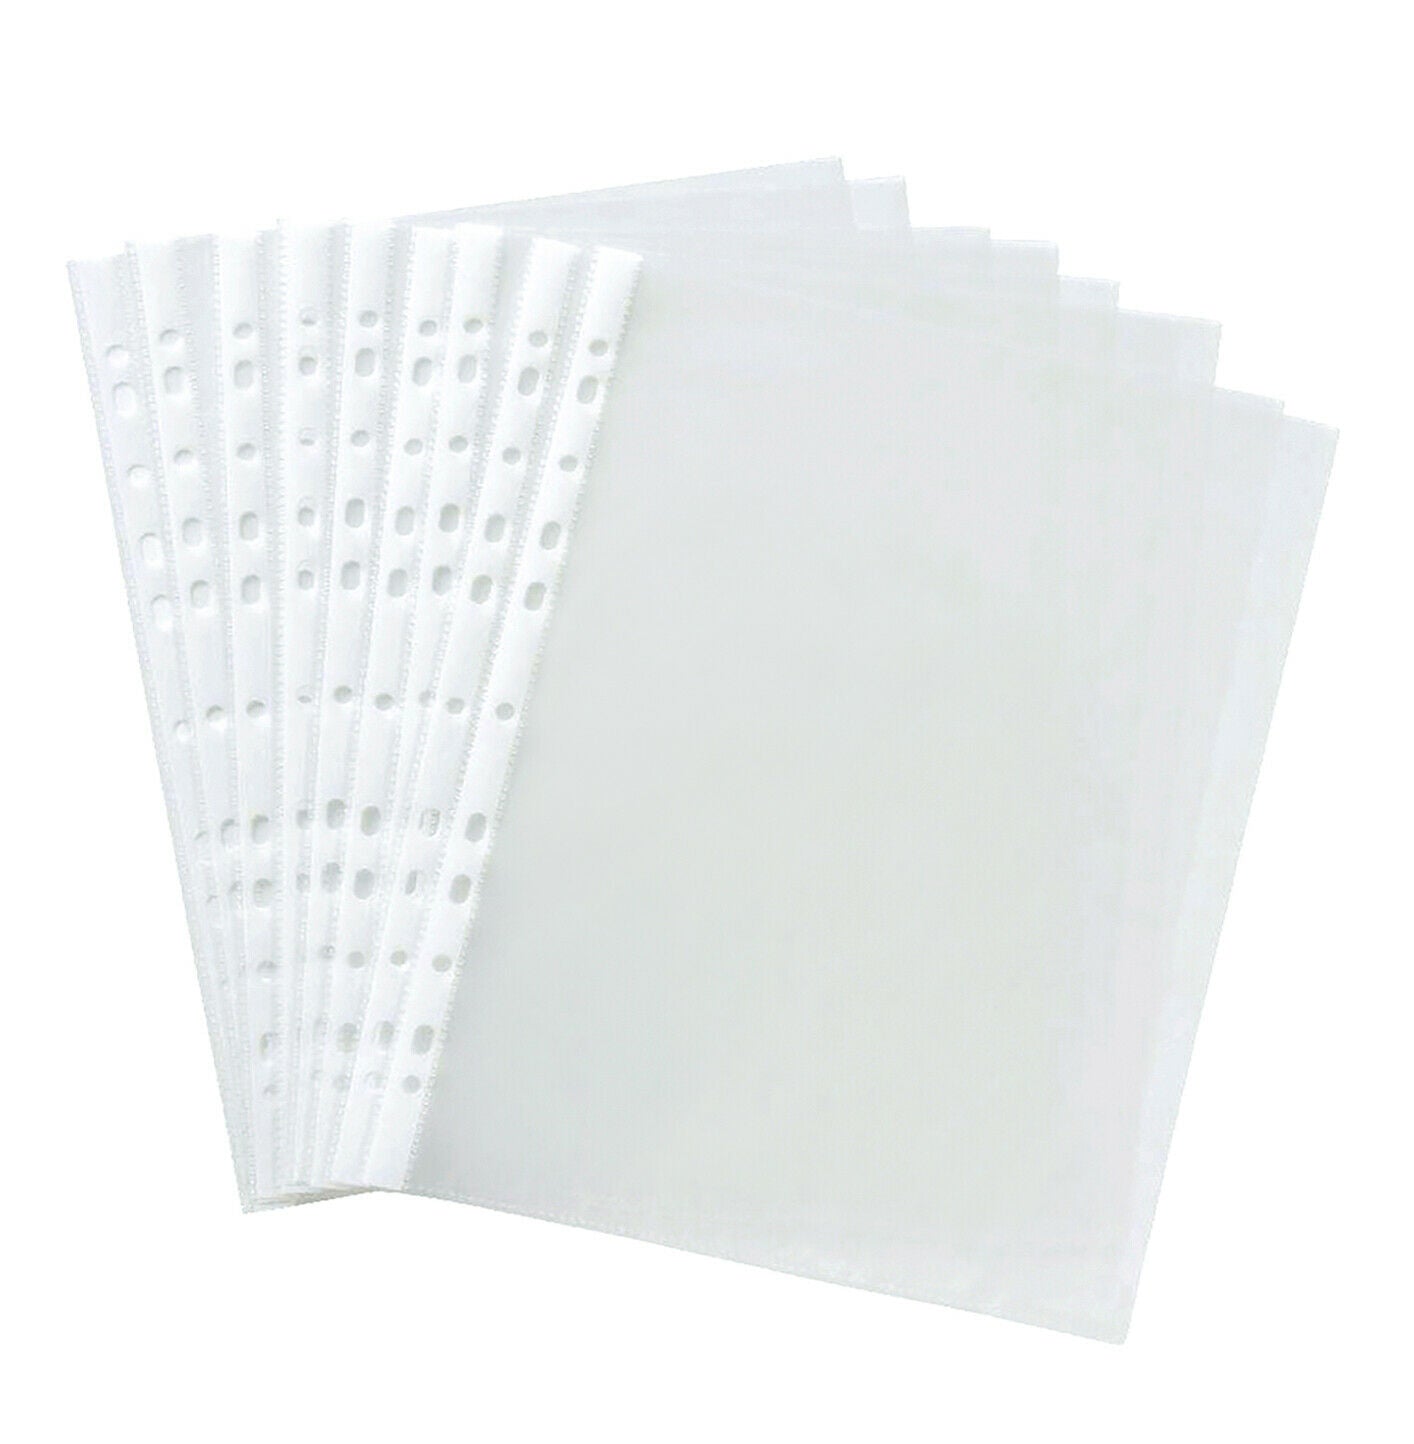 1000 Sheet Protectors 8.5 x 11, Clear Page Protectors, 11 Hole